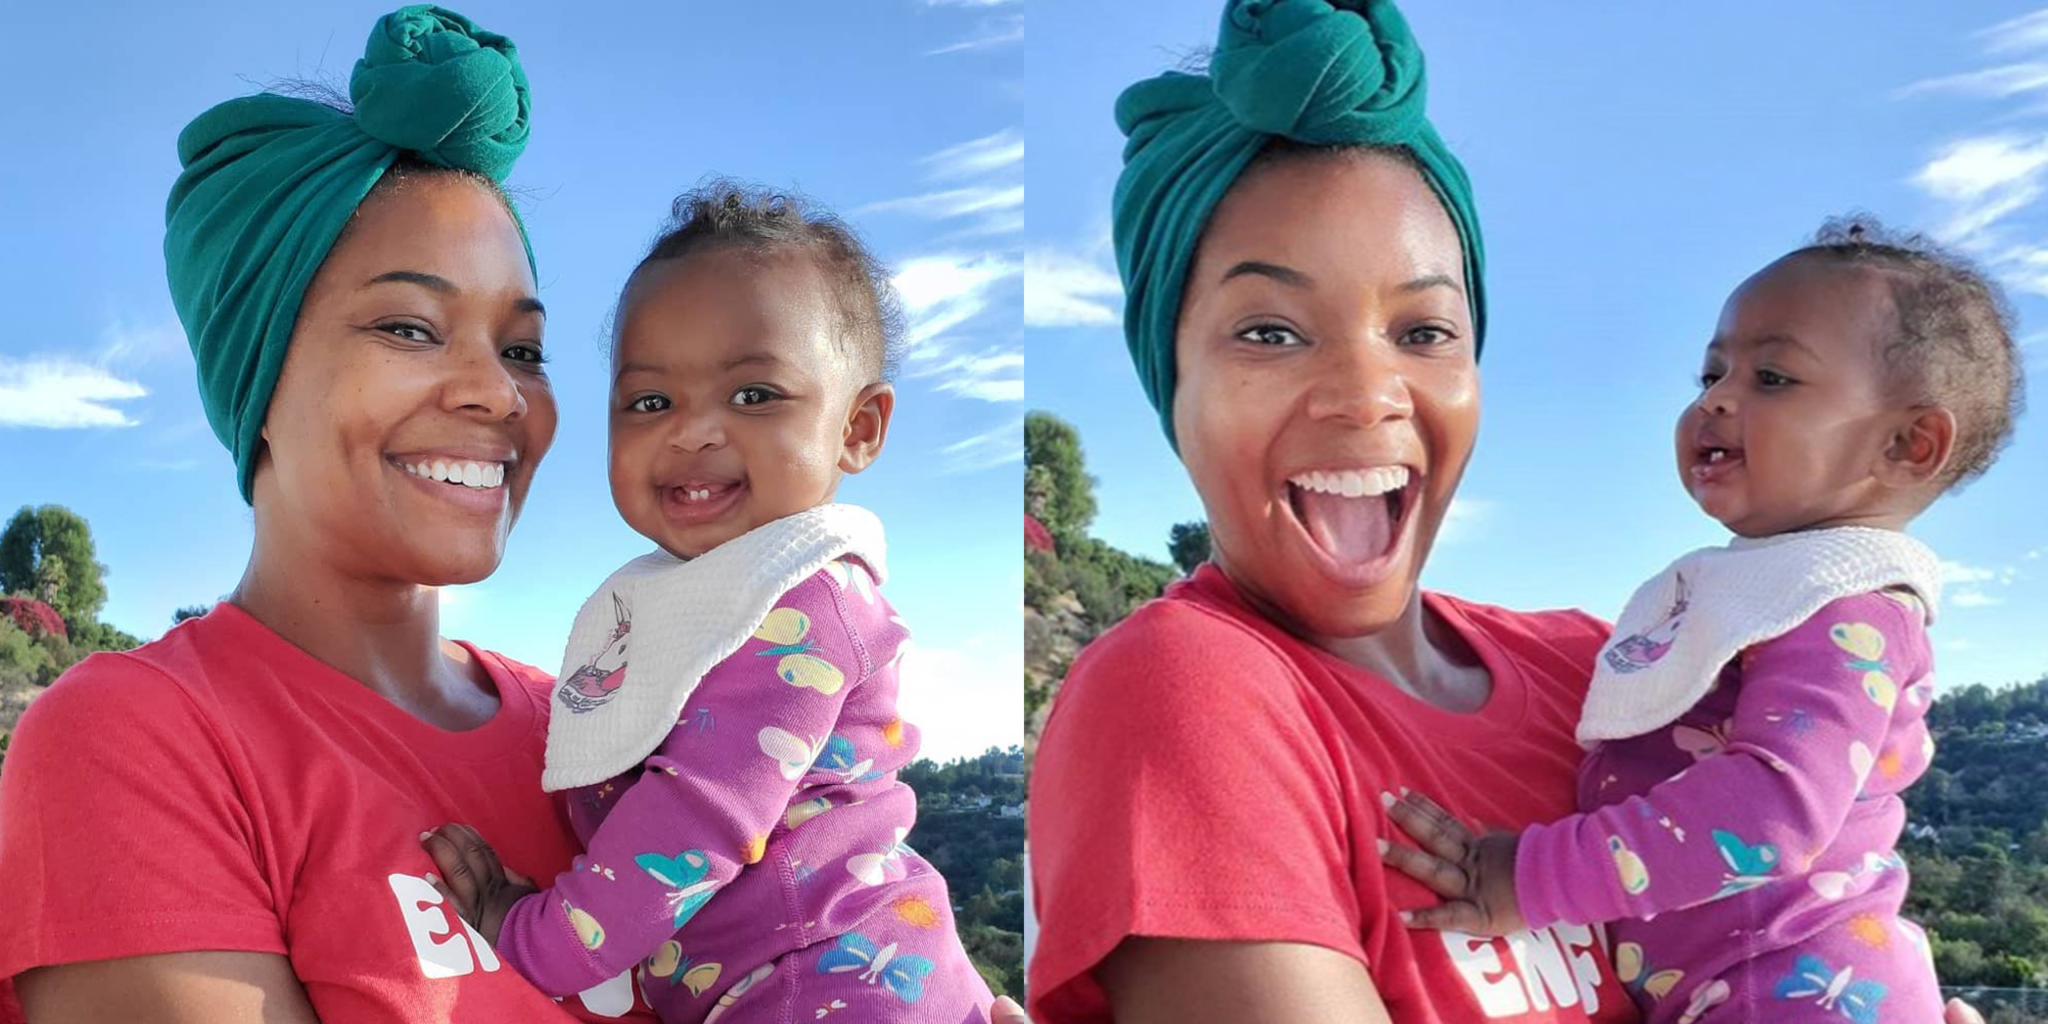 ”gabrielle-union-is-twining-with-kaavia-james-on-the-beach-see-their-matching-swimsuits”